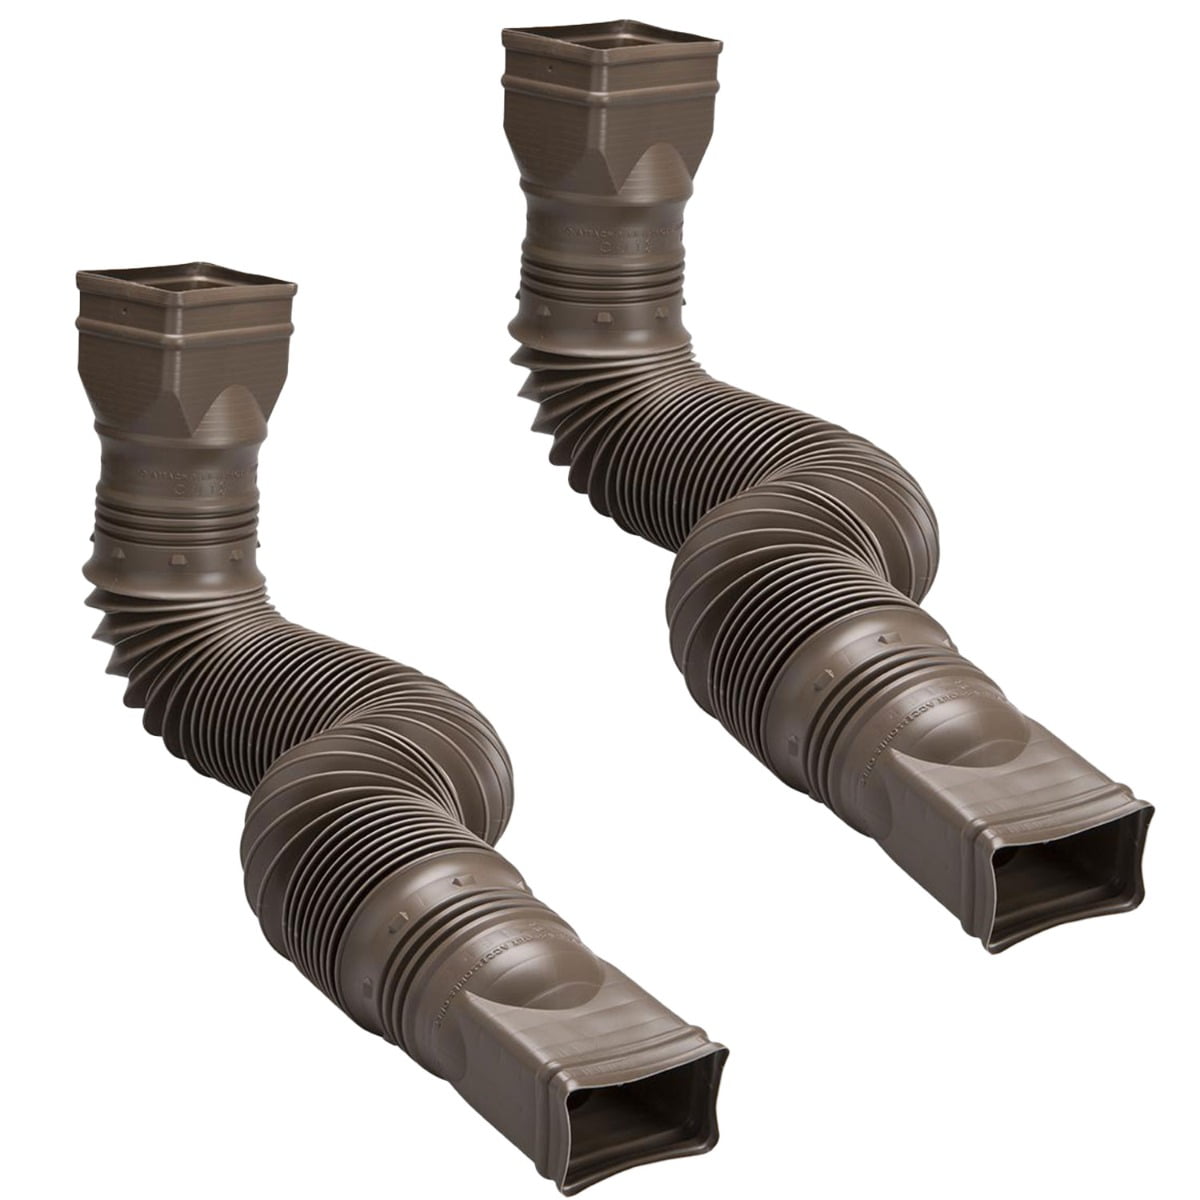 25 to 55 inches WholesalePlumbing Supply Brown Flexible Downspout Extension Gutter Connector Rainwater Drainage 